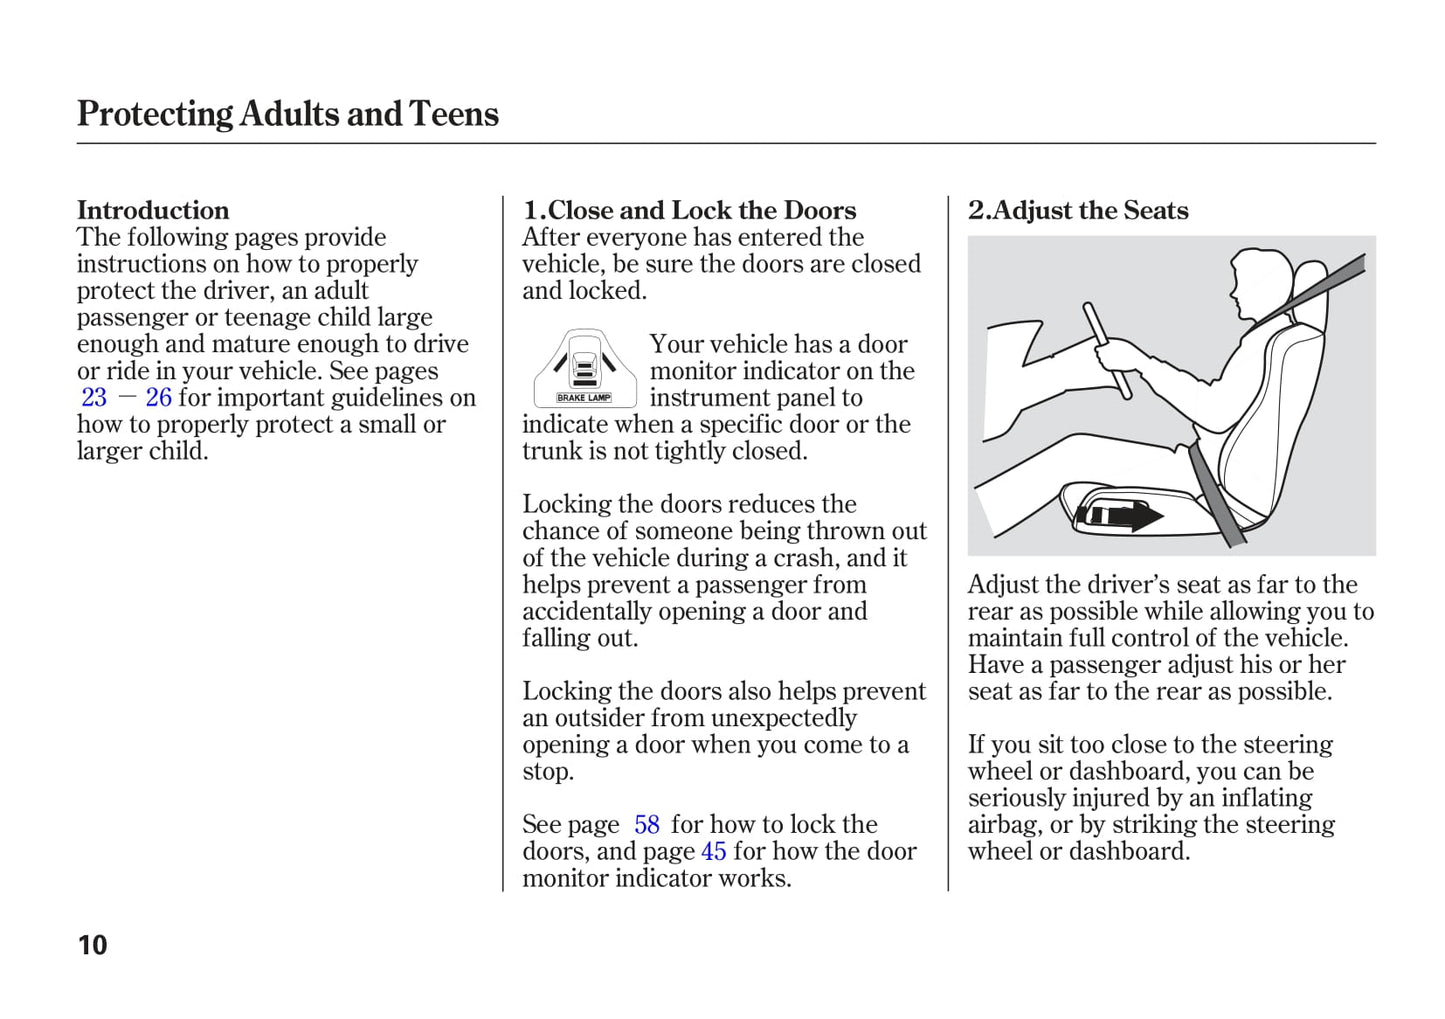 2005 Acura NSX Owner's Manual | English